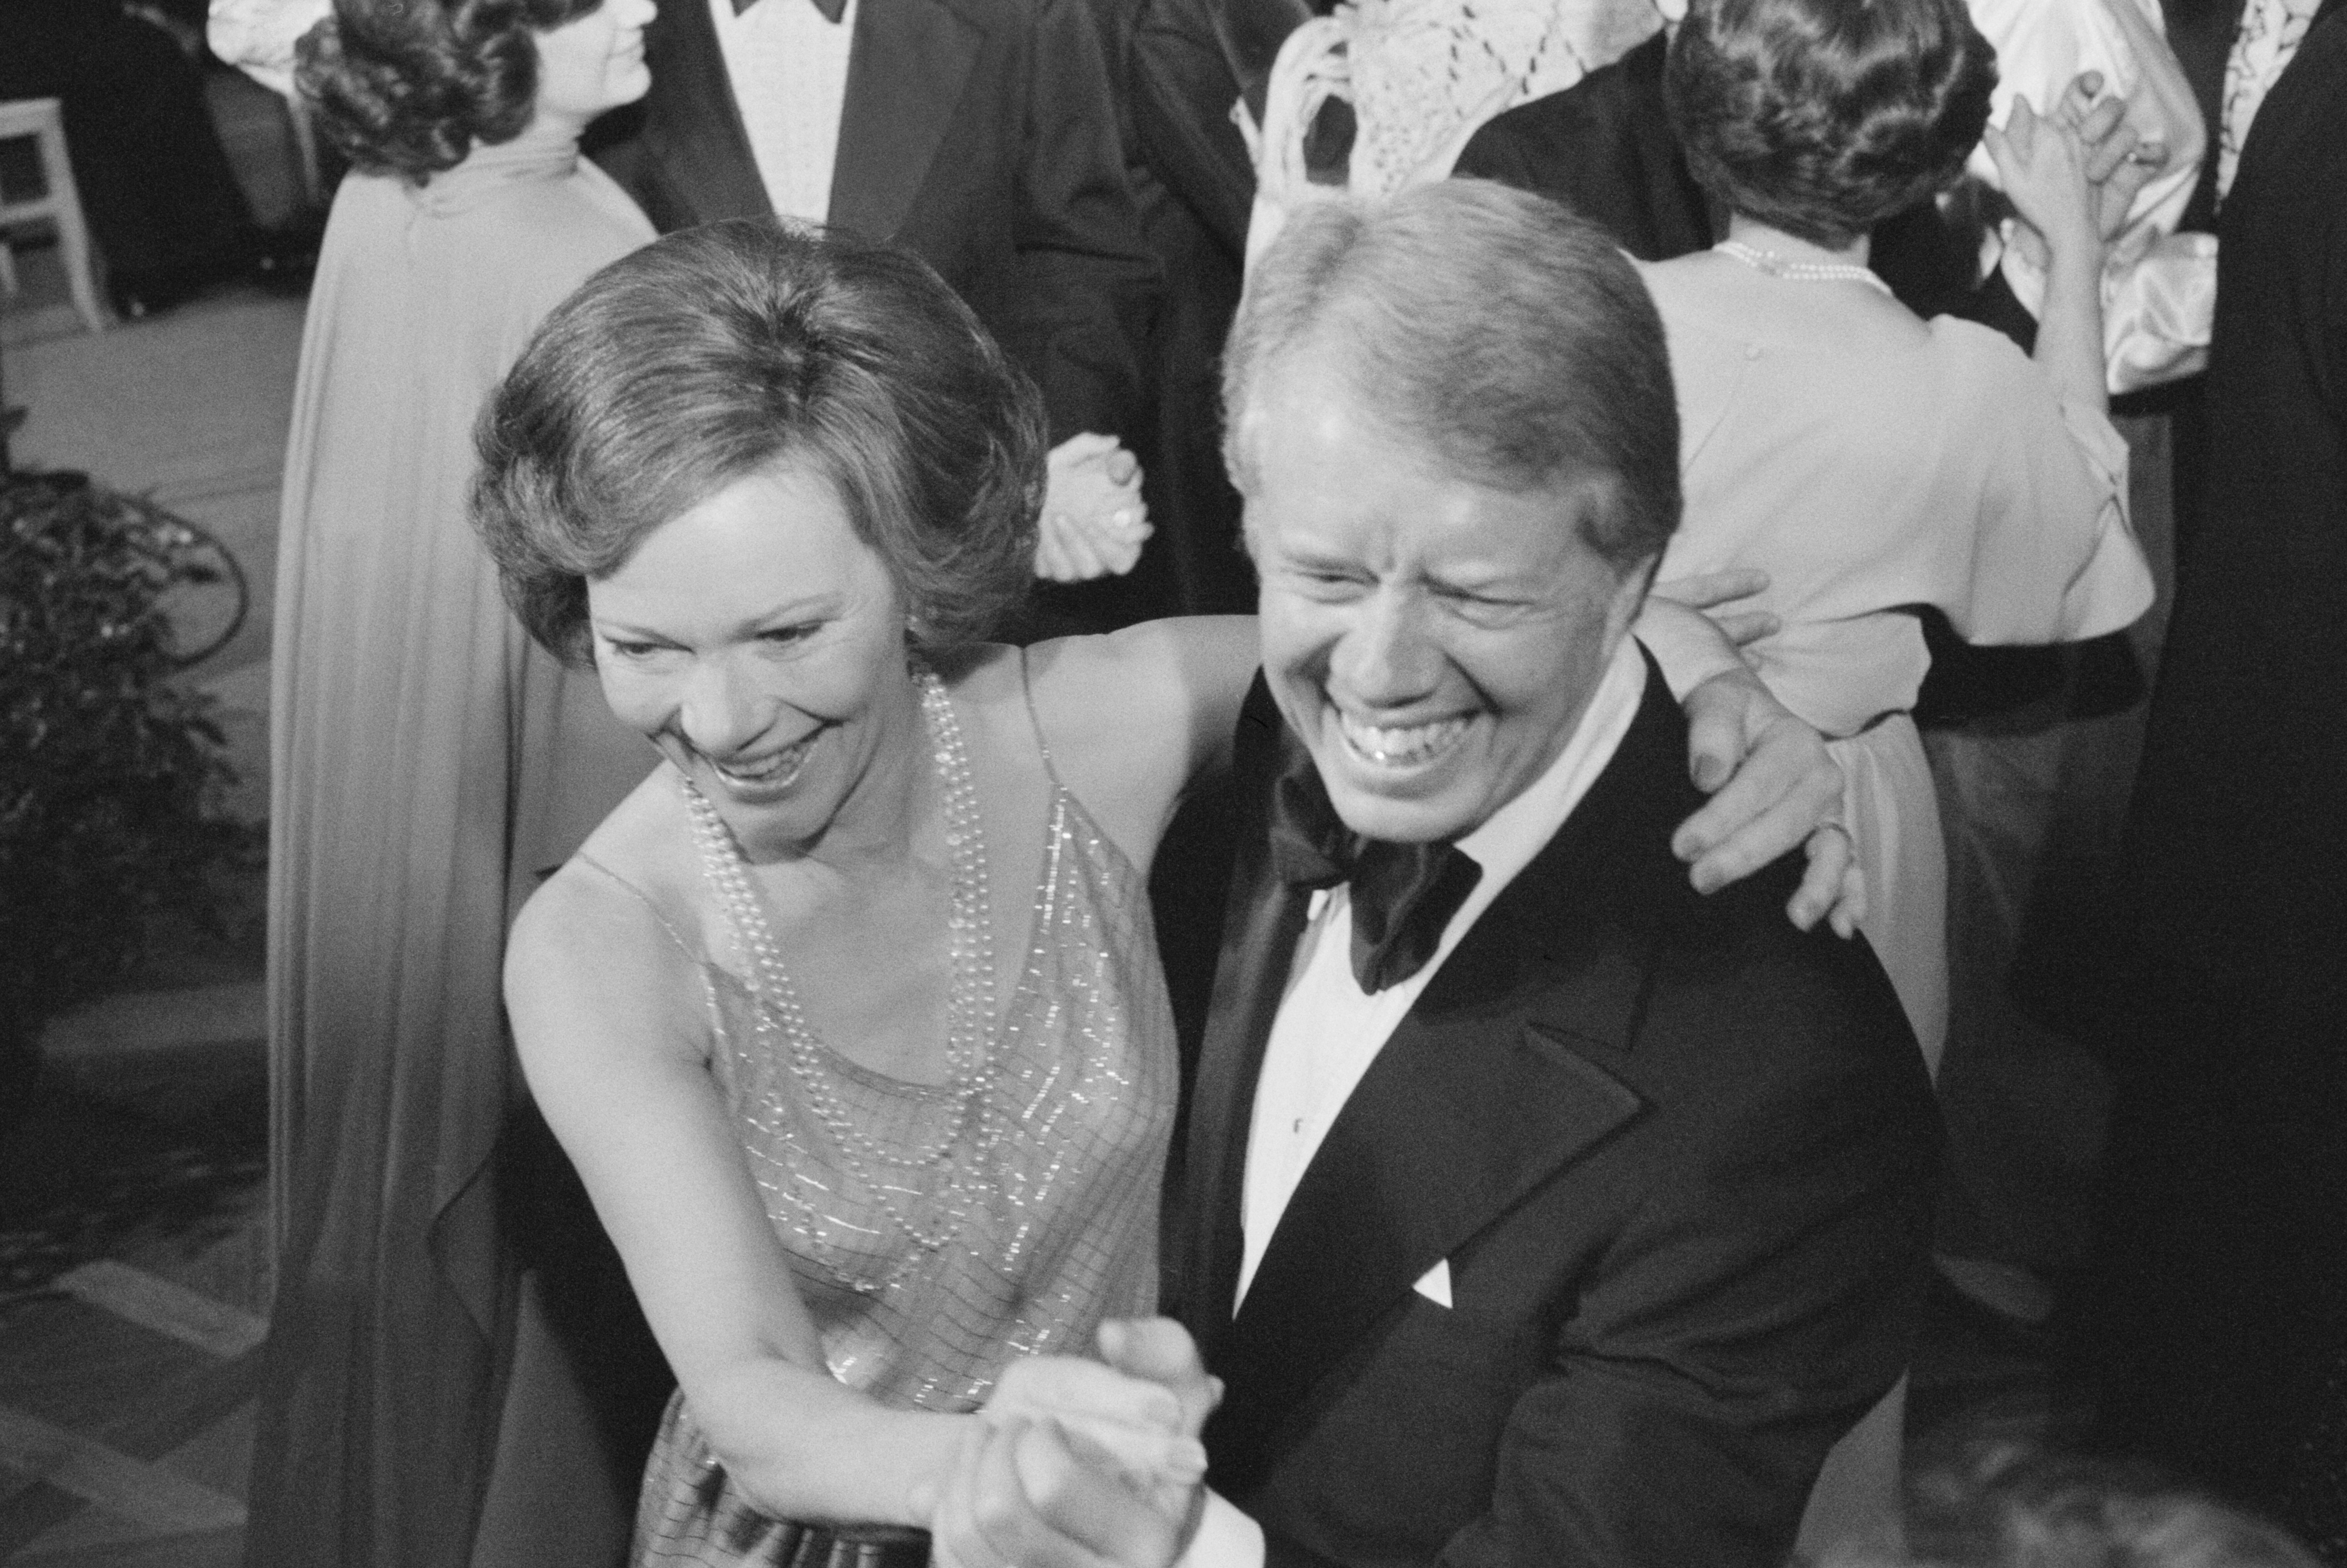 Rosalynn and Jimmy Carter dance at the White House Congressional Ball in Washington, D.C., on December 13, 1978 | Source: Getty Images